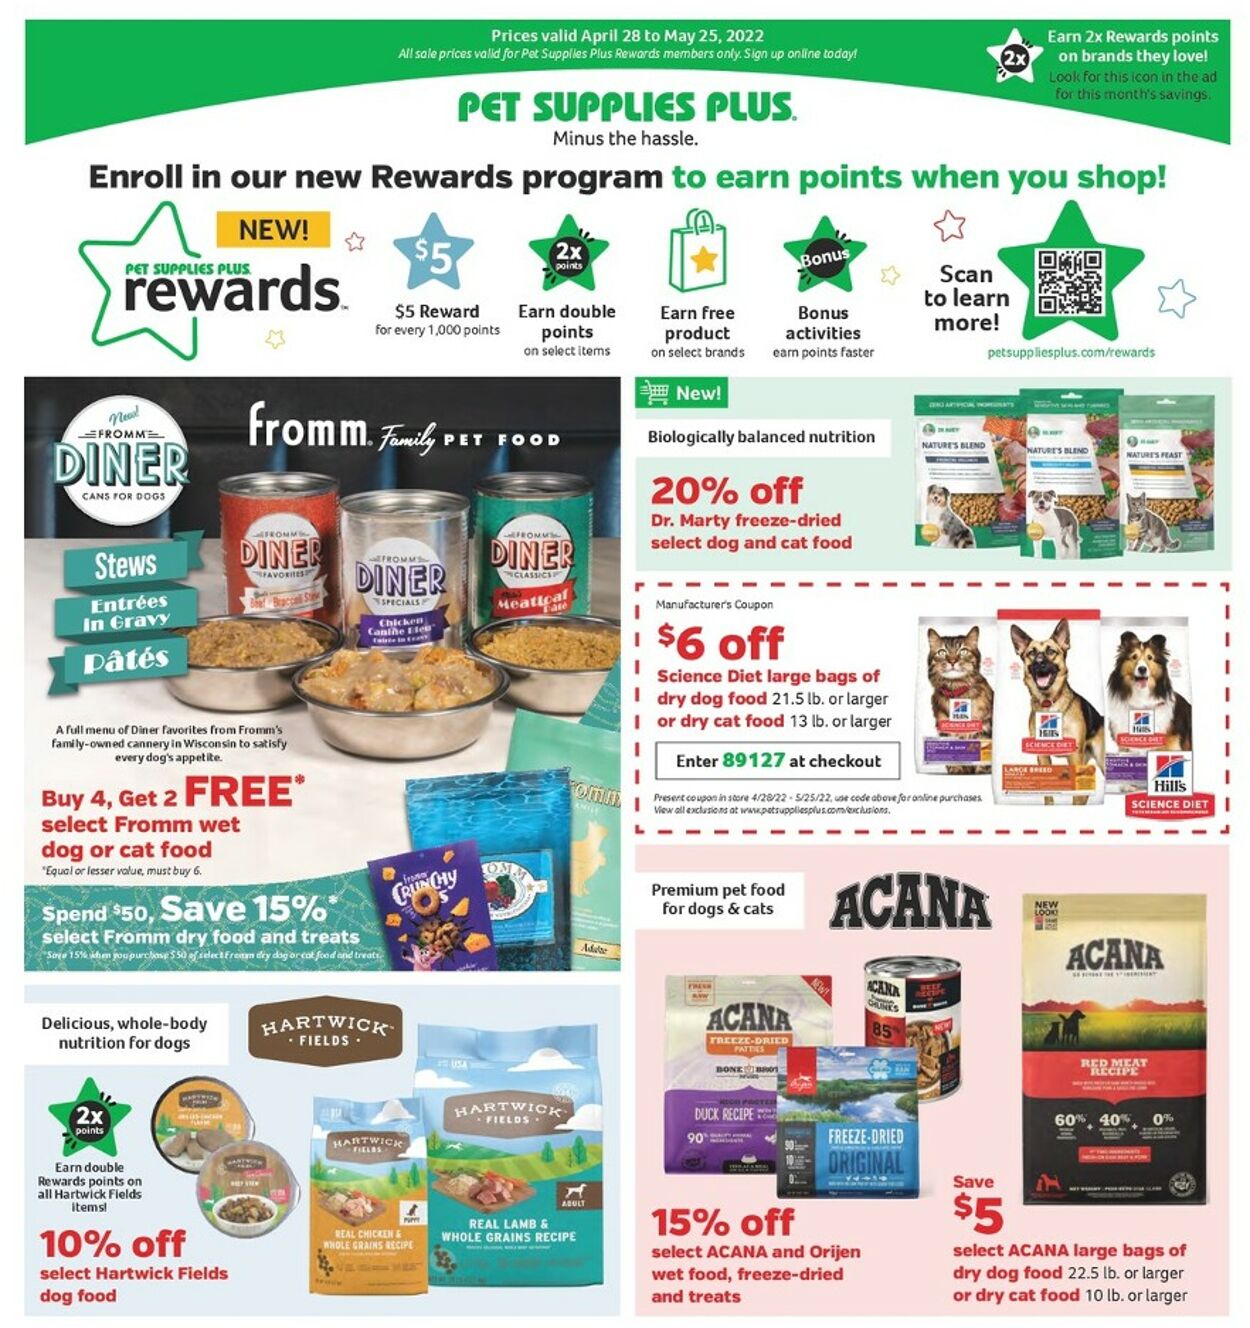 Pet Supplies Plus Promotional weekly ads